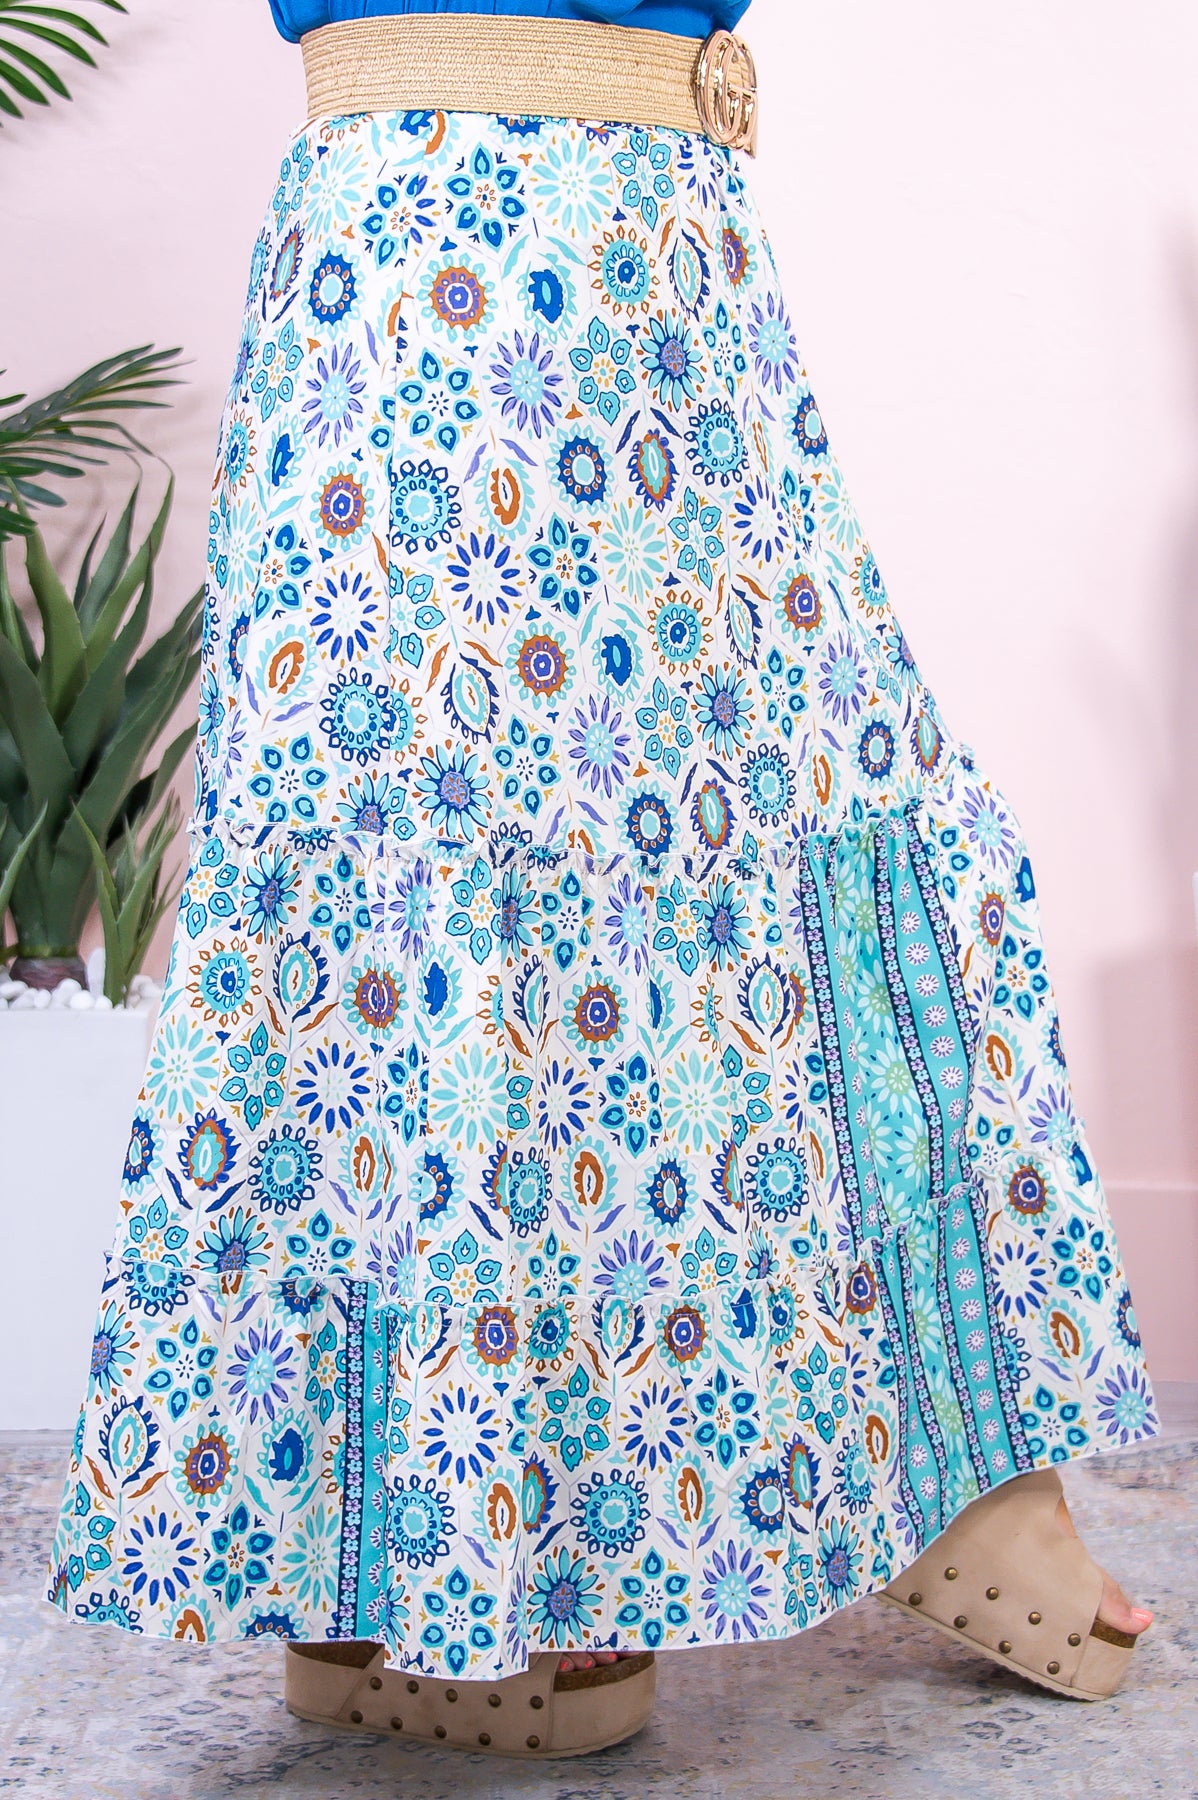 Key Of Style Mint/Multi Color Printed Skirt - E1142MT